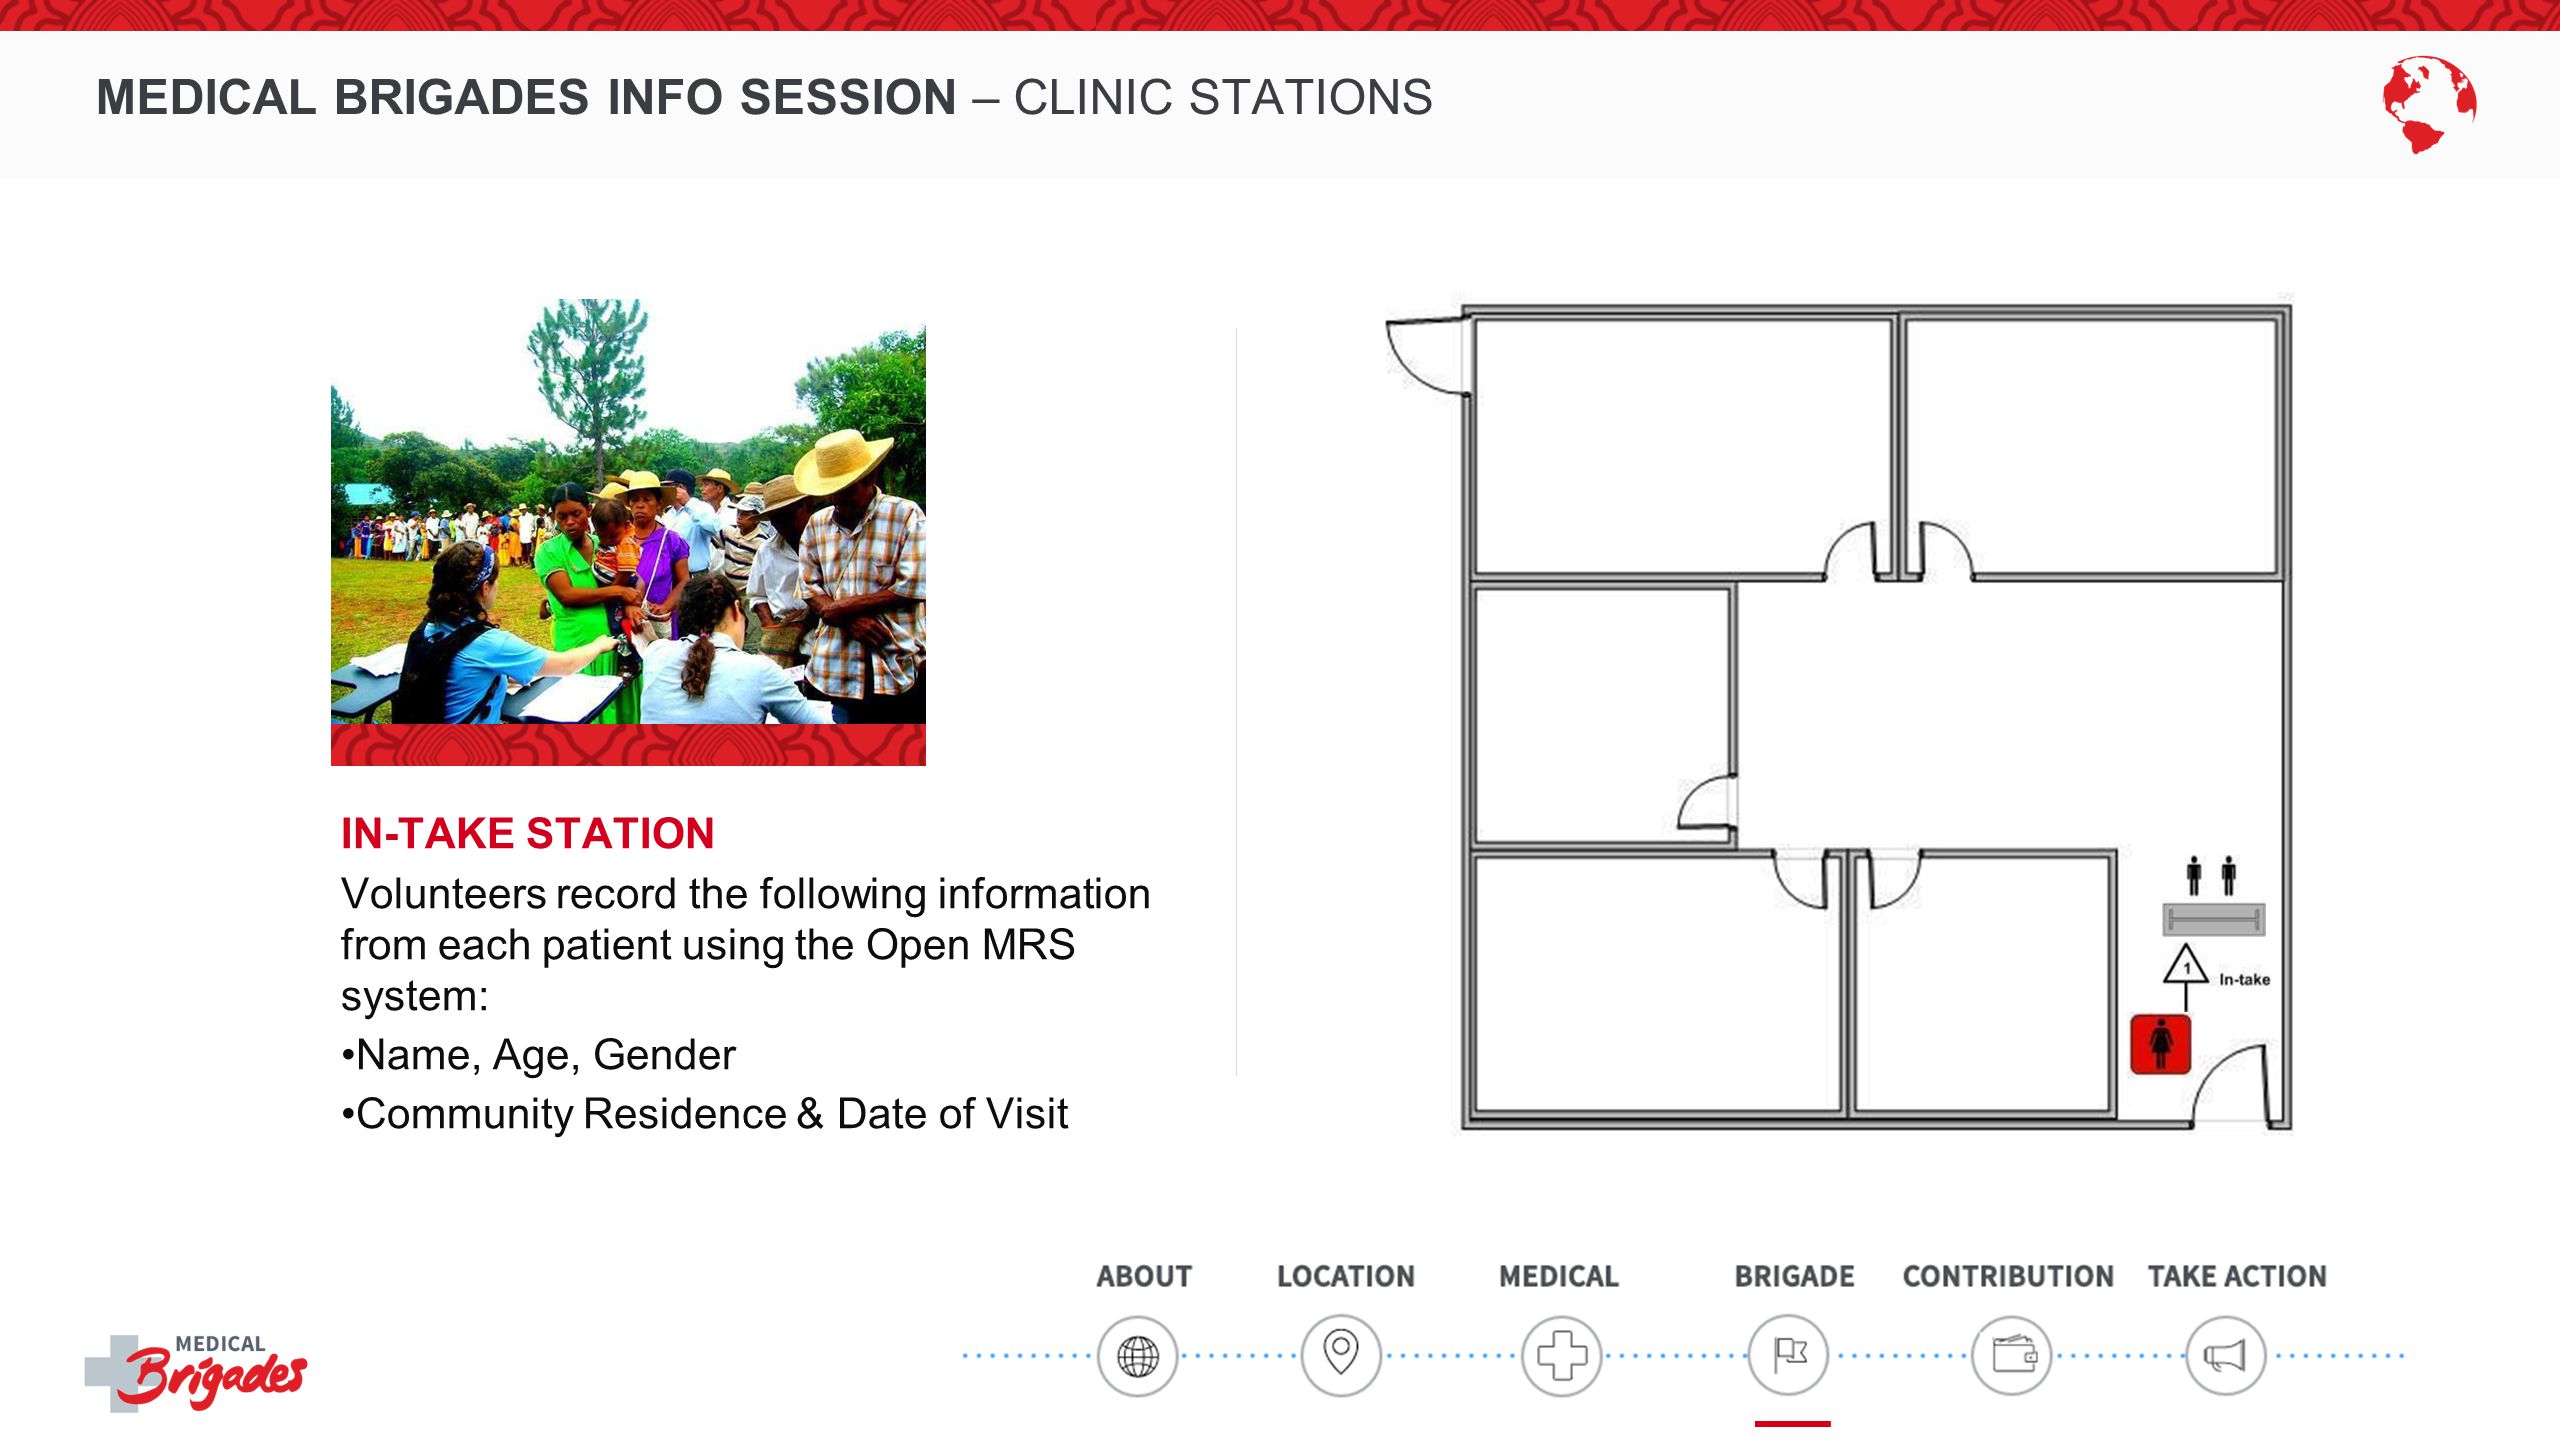 MEDICAL BRIGADES INFO SESSION – CLINIC STATIONS IN-TAKE STATION Volunteers record the following information from each patient using the Open MRS system: Name, Age, Gender Community Residence & Date of Visit